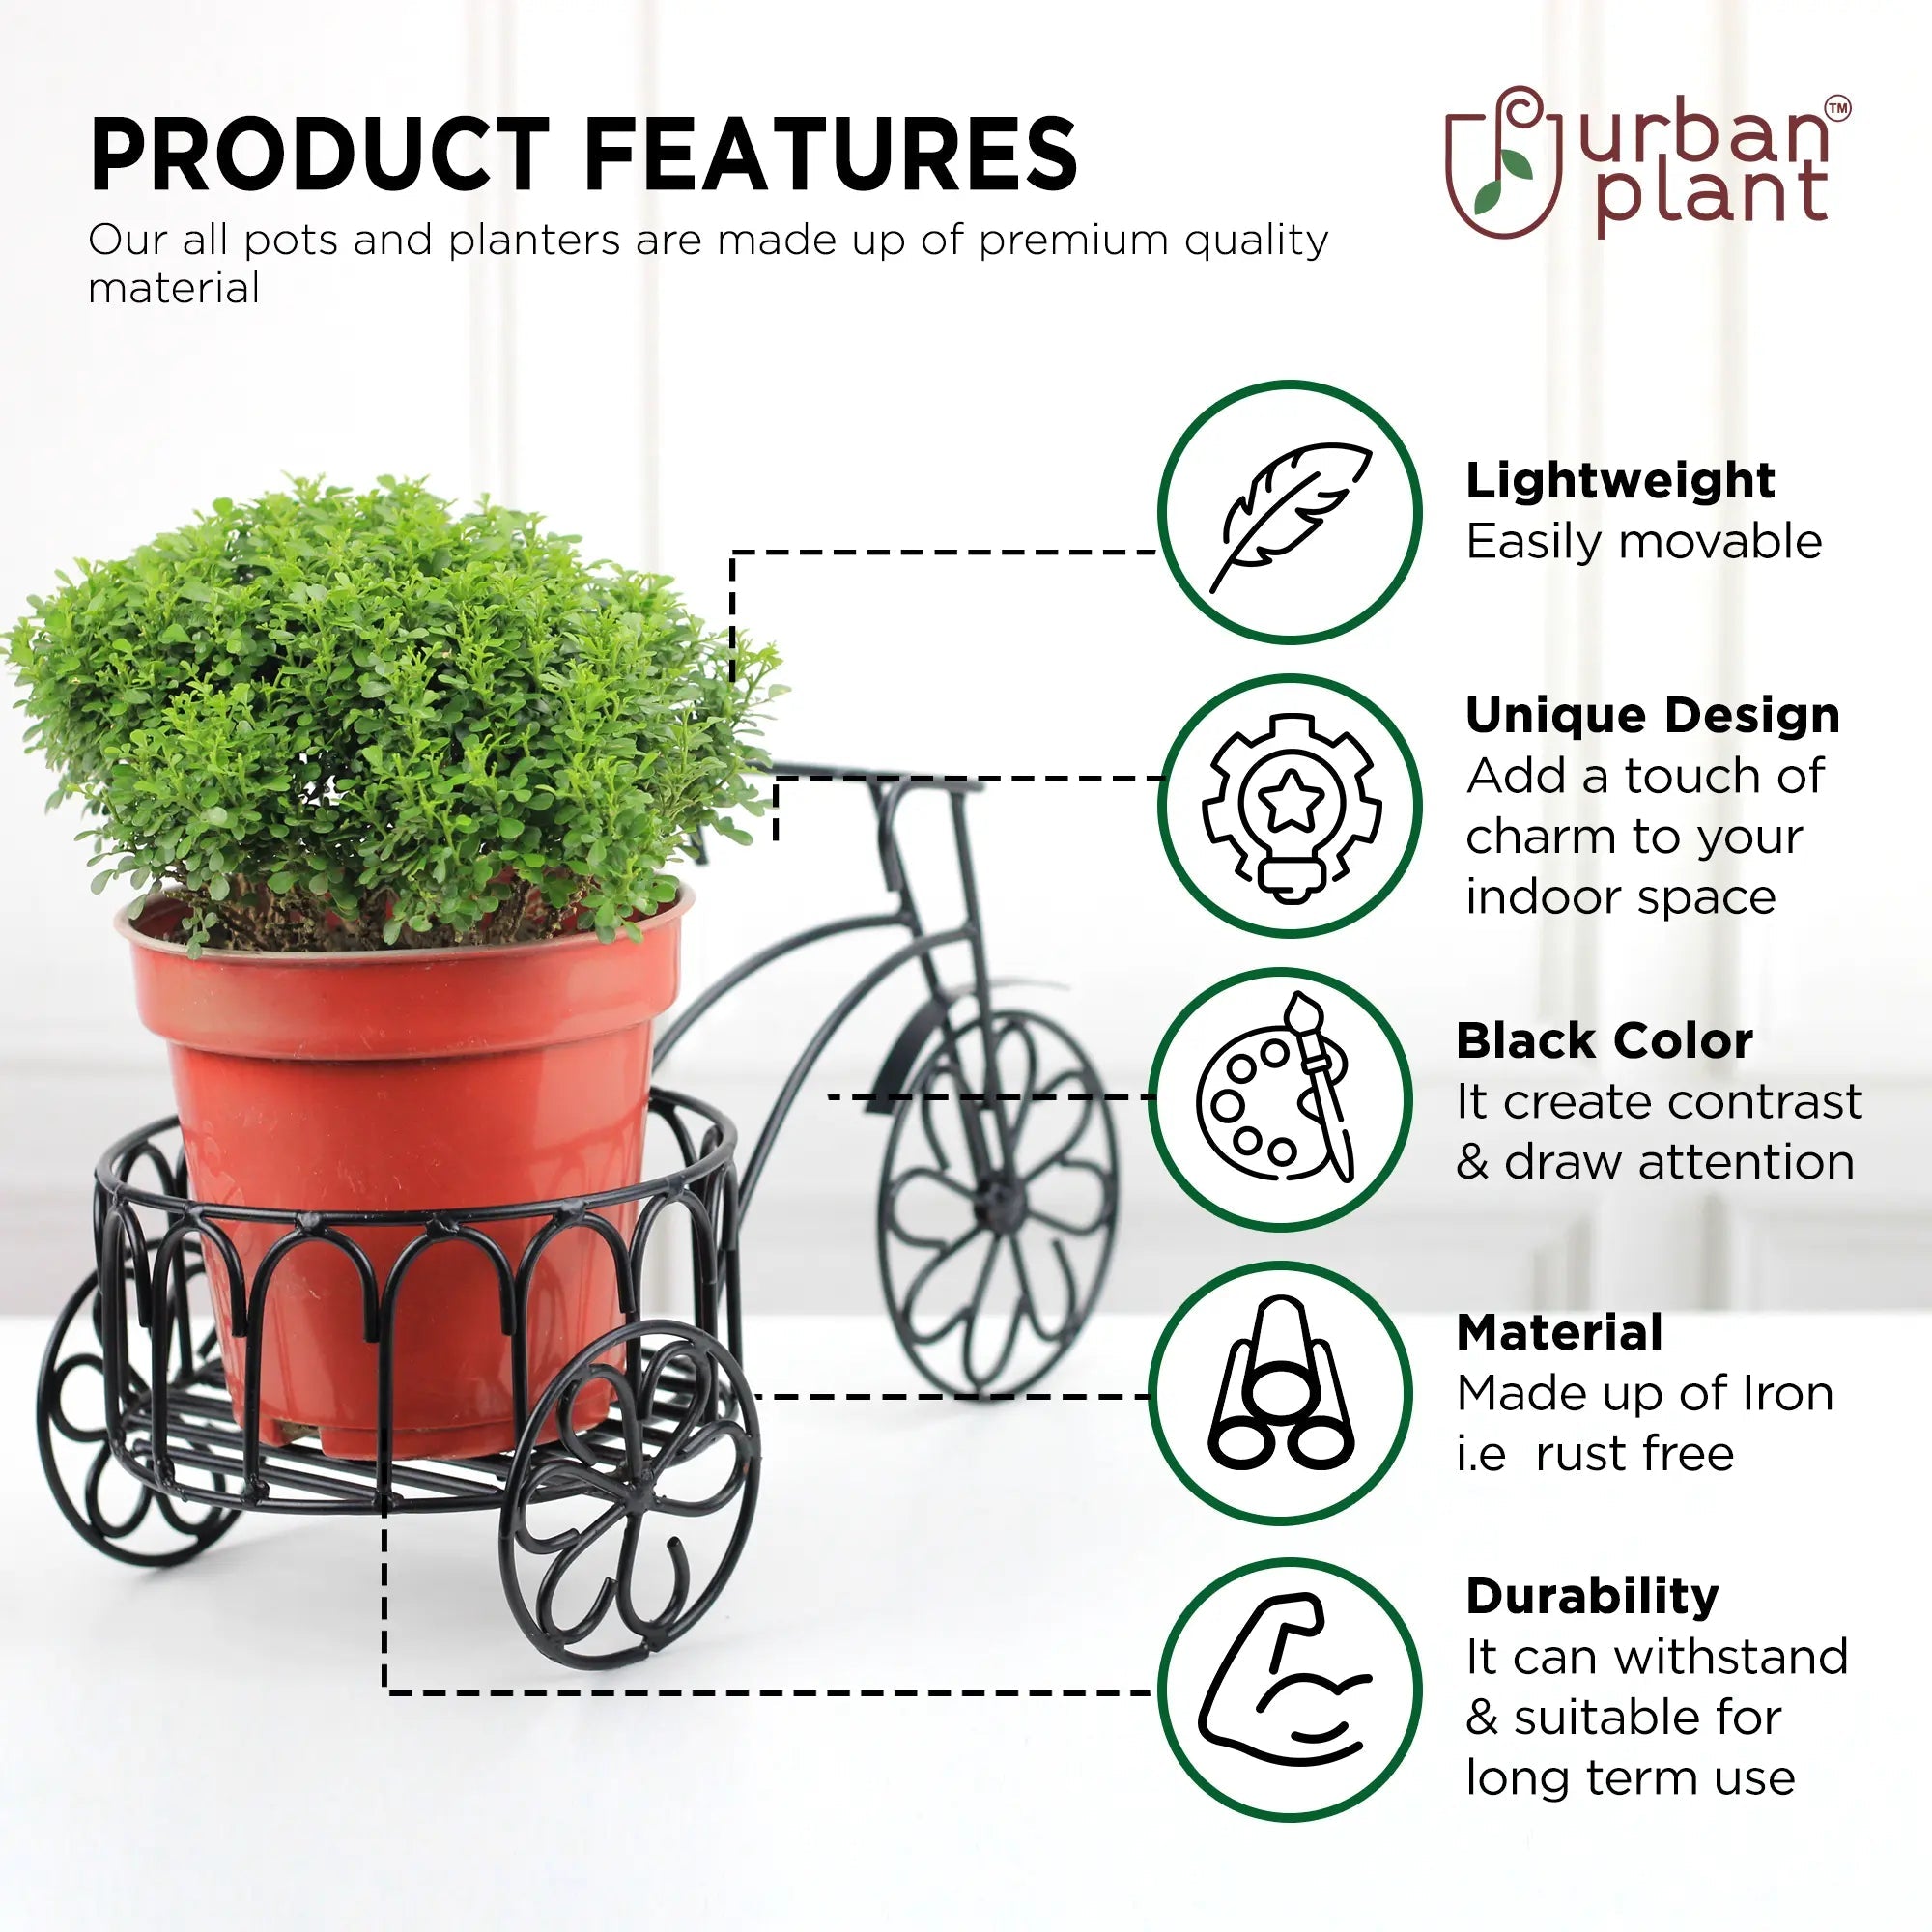 Table Top Rickshaw Style Metal Planter for Indoor (No. 1152) Planter Stand Urban Plant 